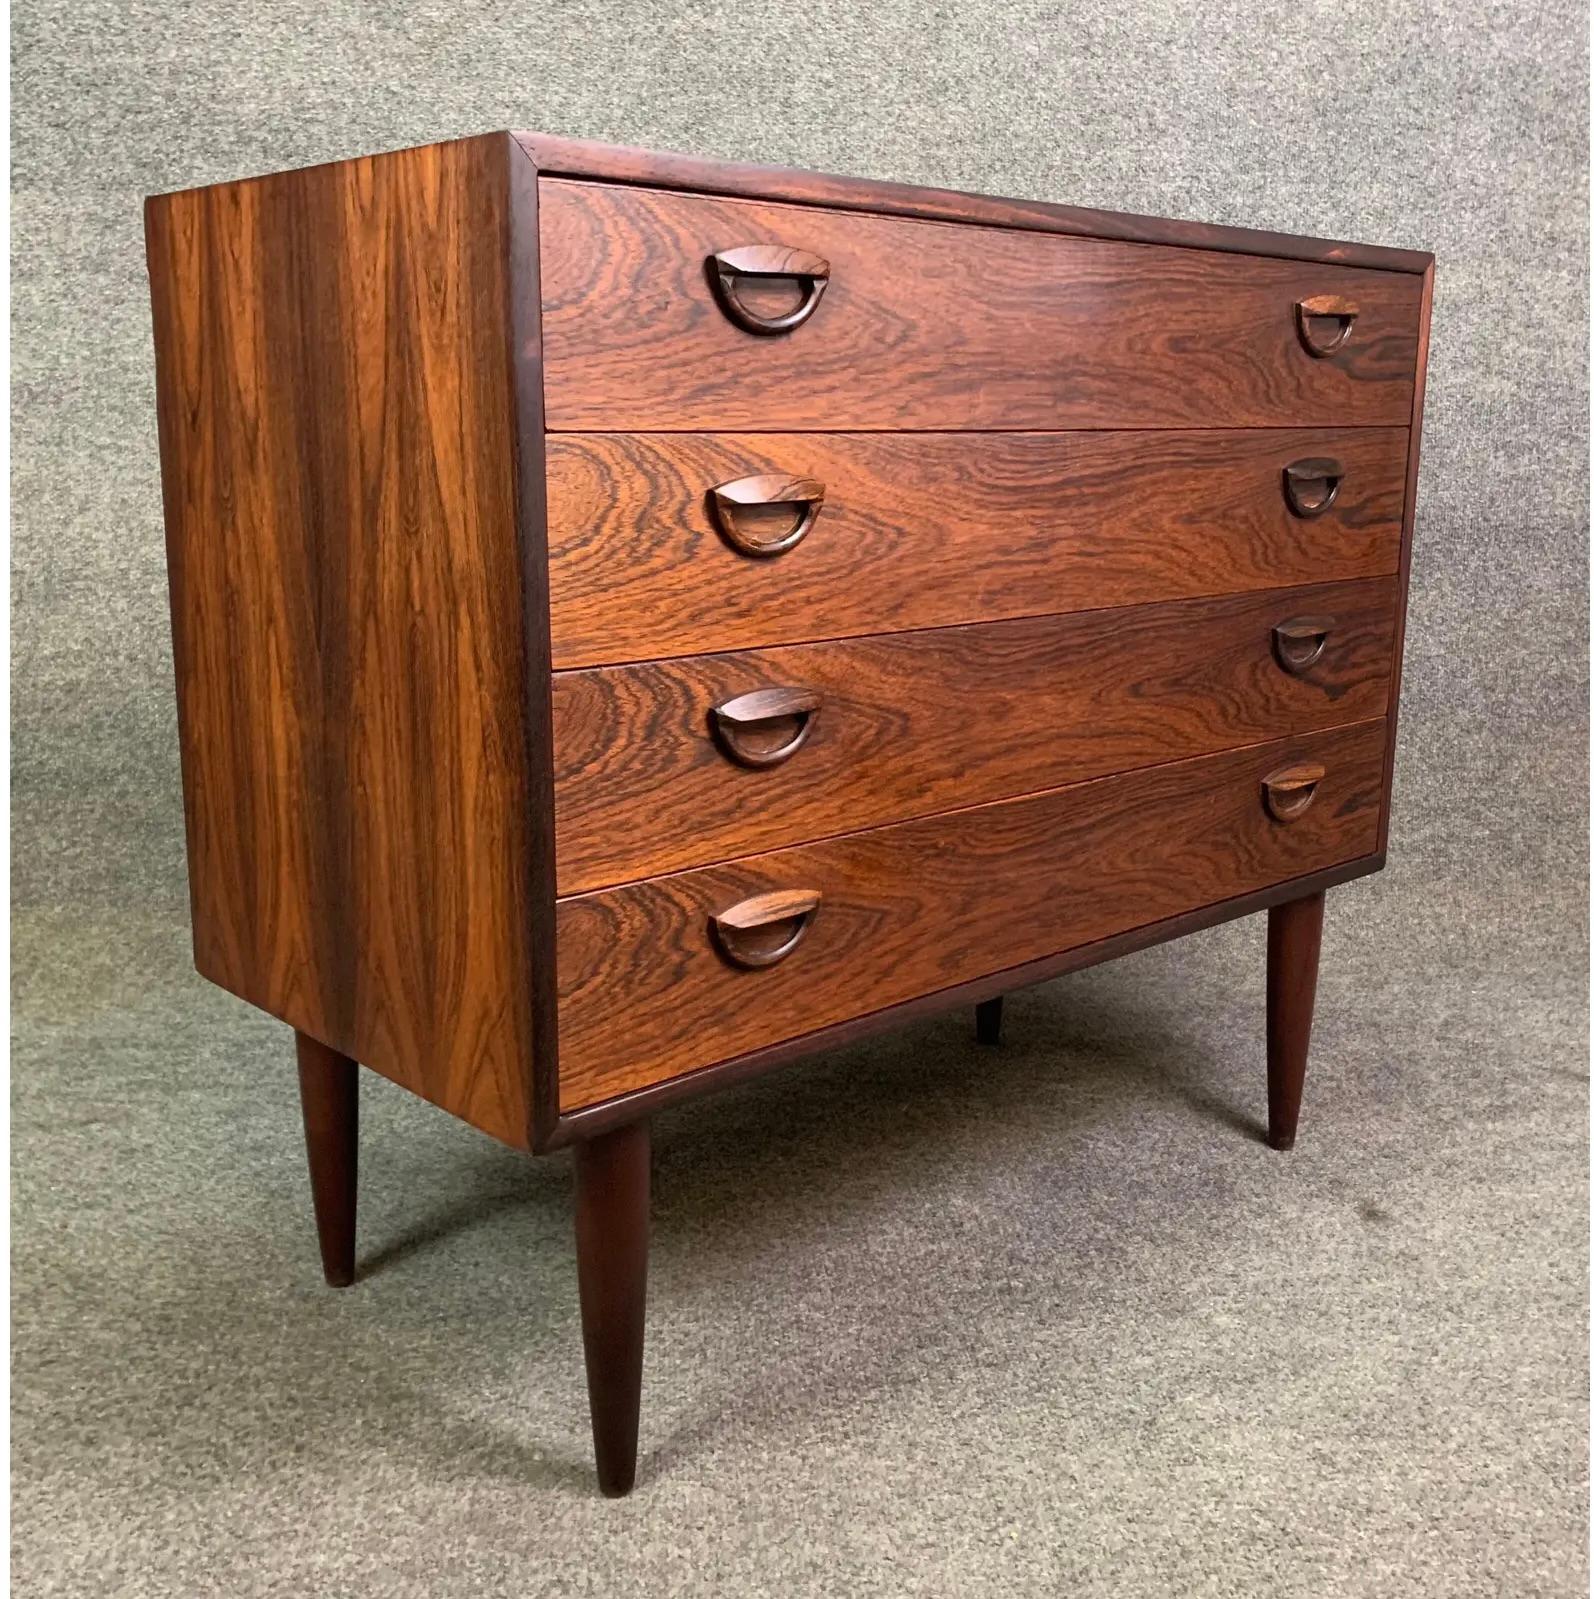 Mid-20th Century Vintage Danish Mid-Century Rosewood Chest of Drawers Dresser For Sale